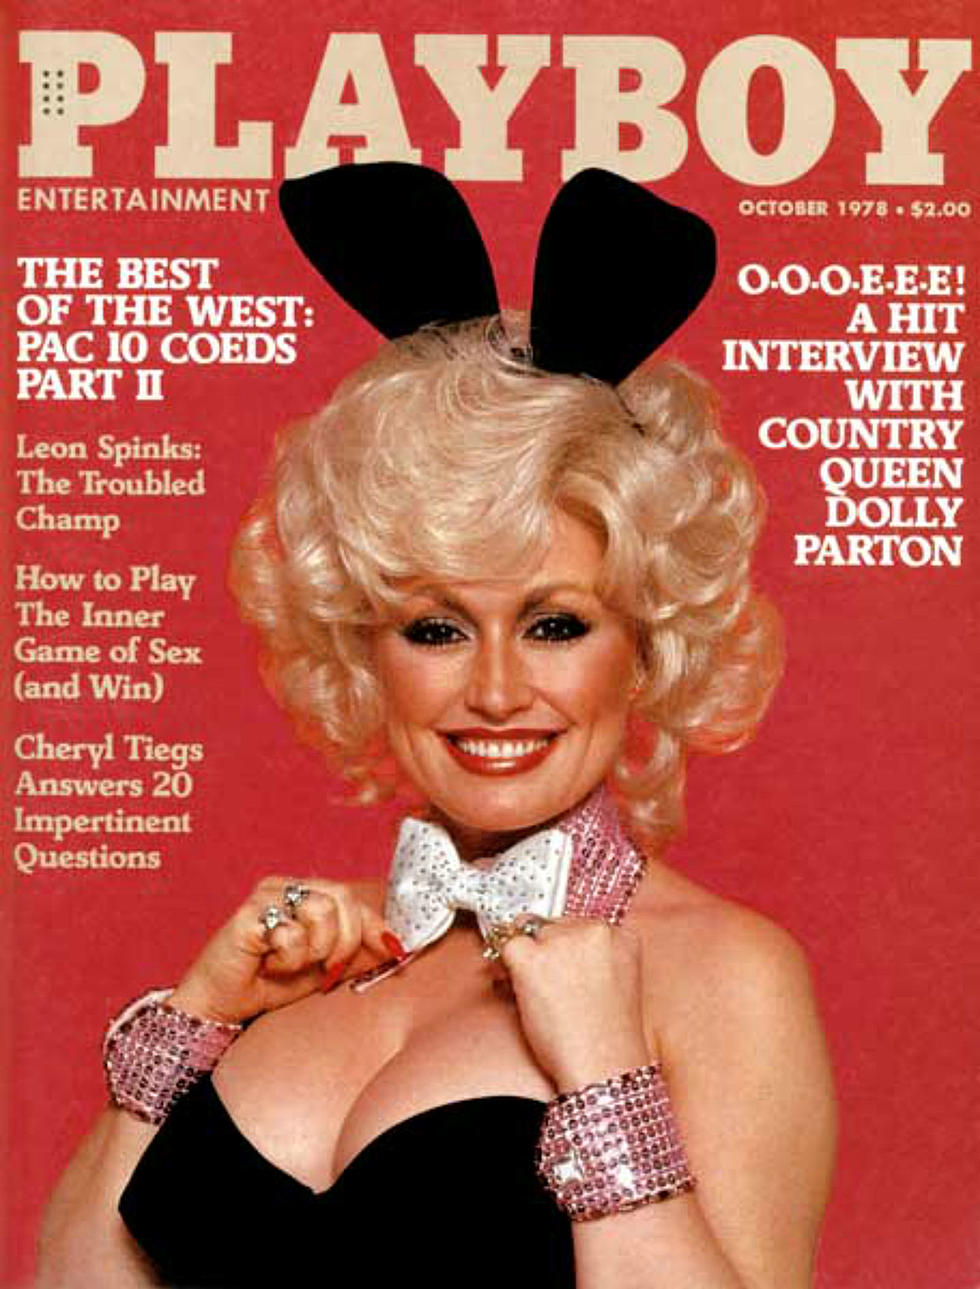 I'll Never Forget The First Playboy I Ever Saw